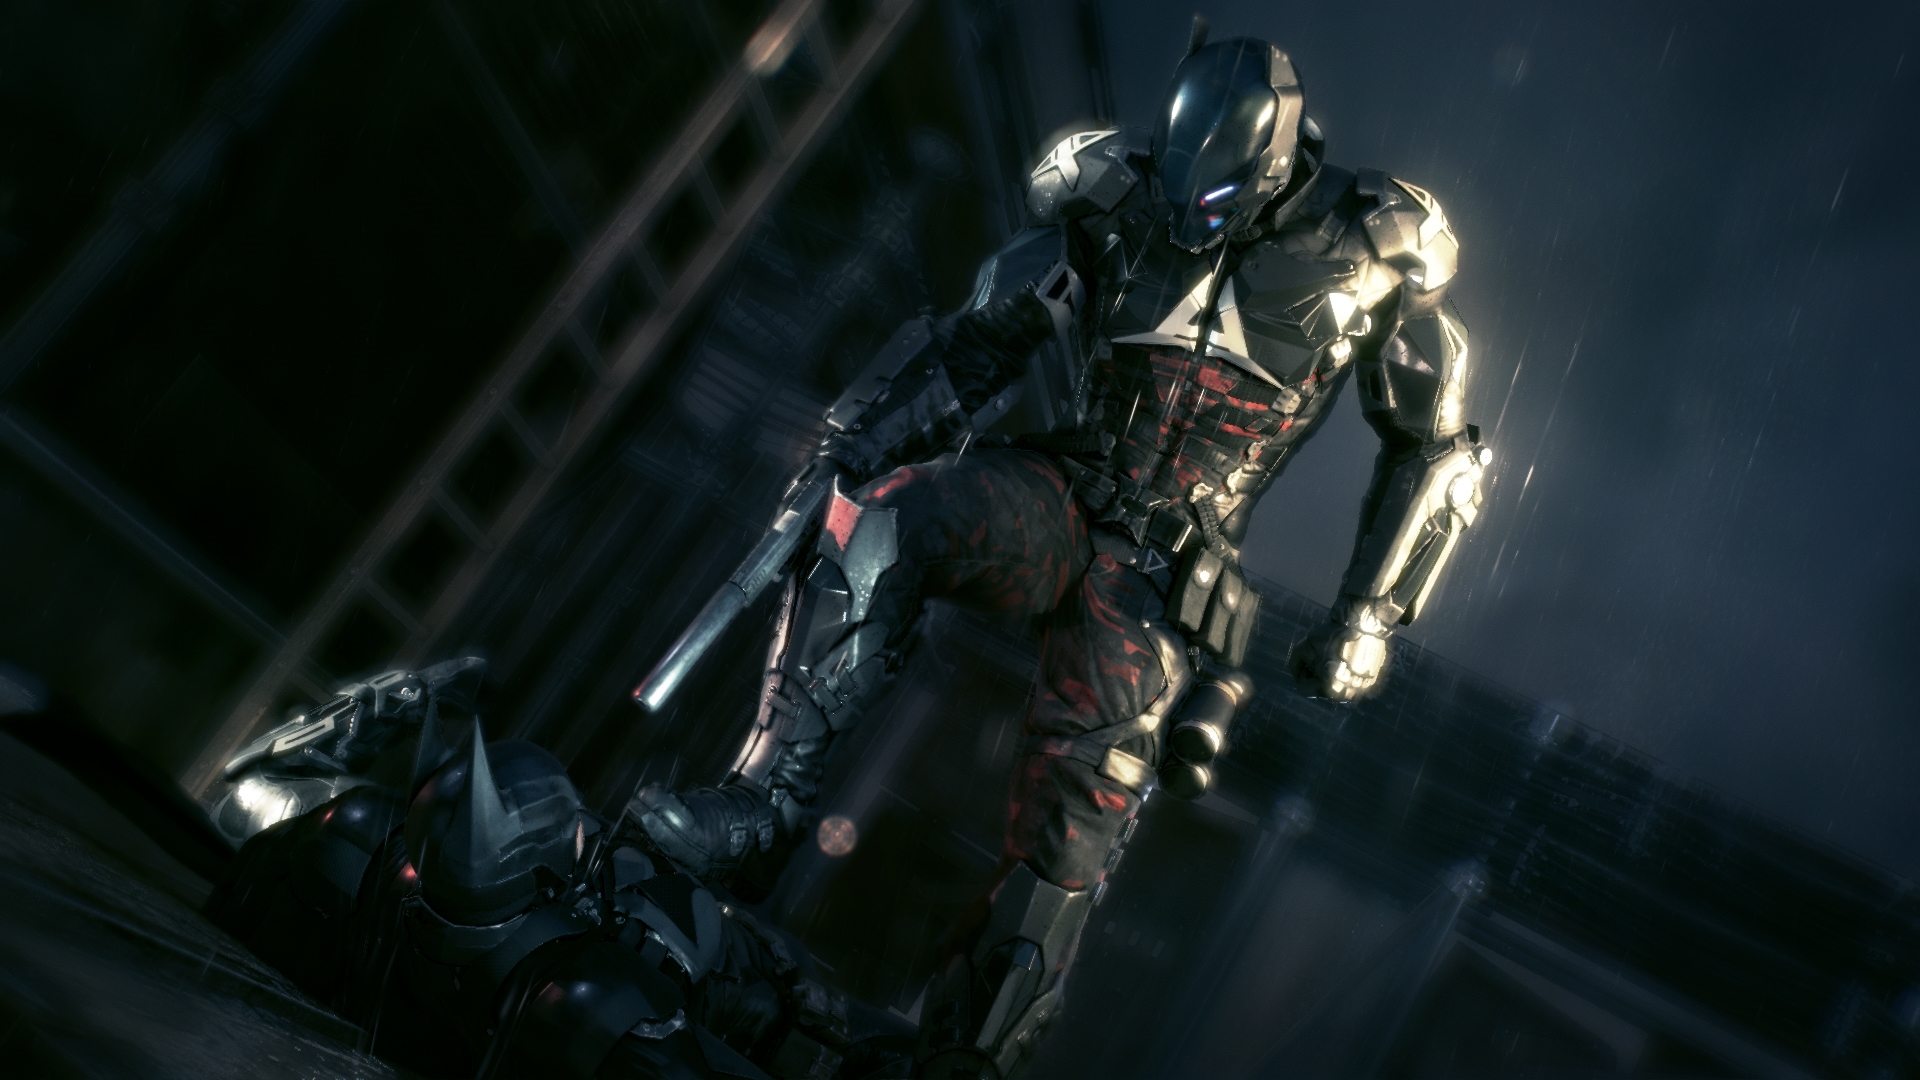 download arkham knight for free